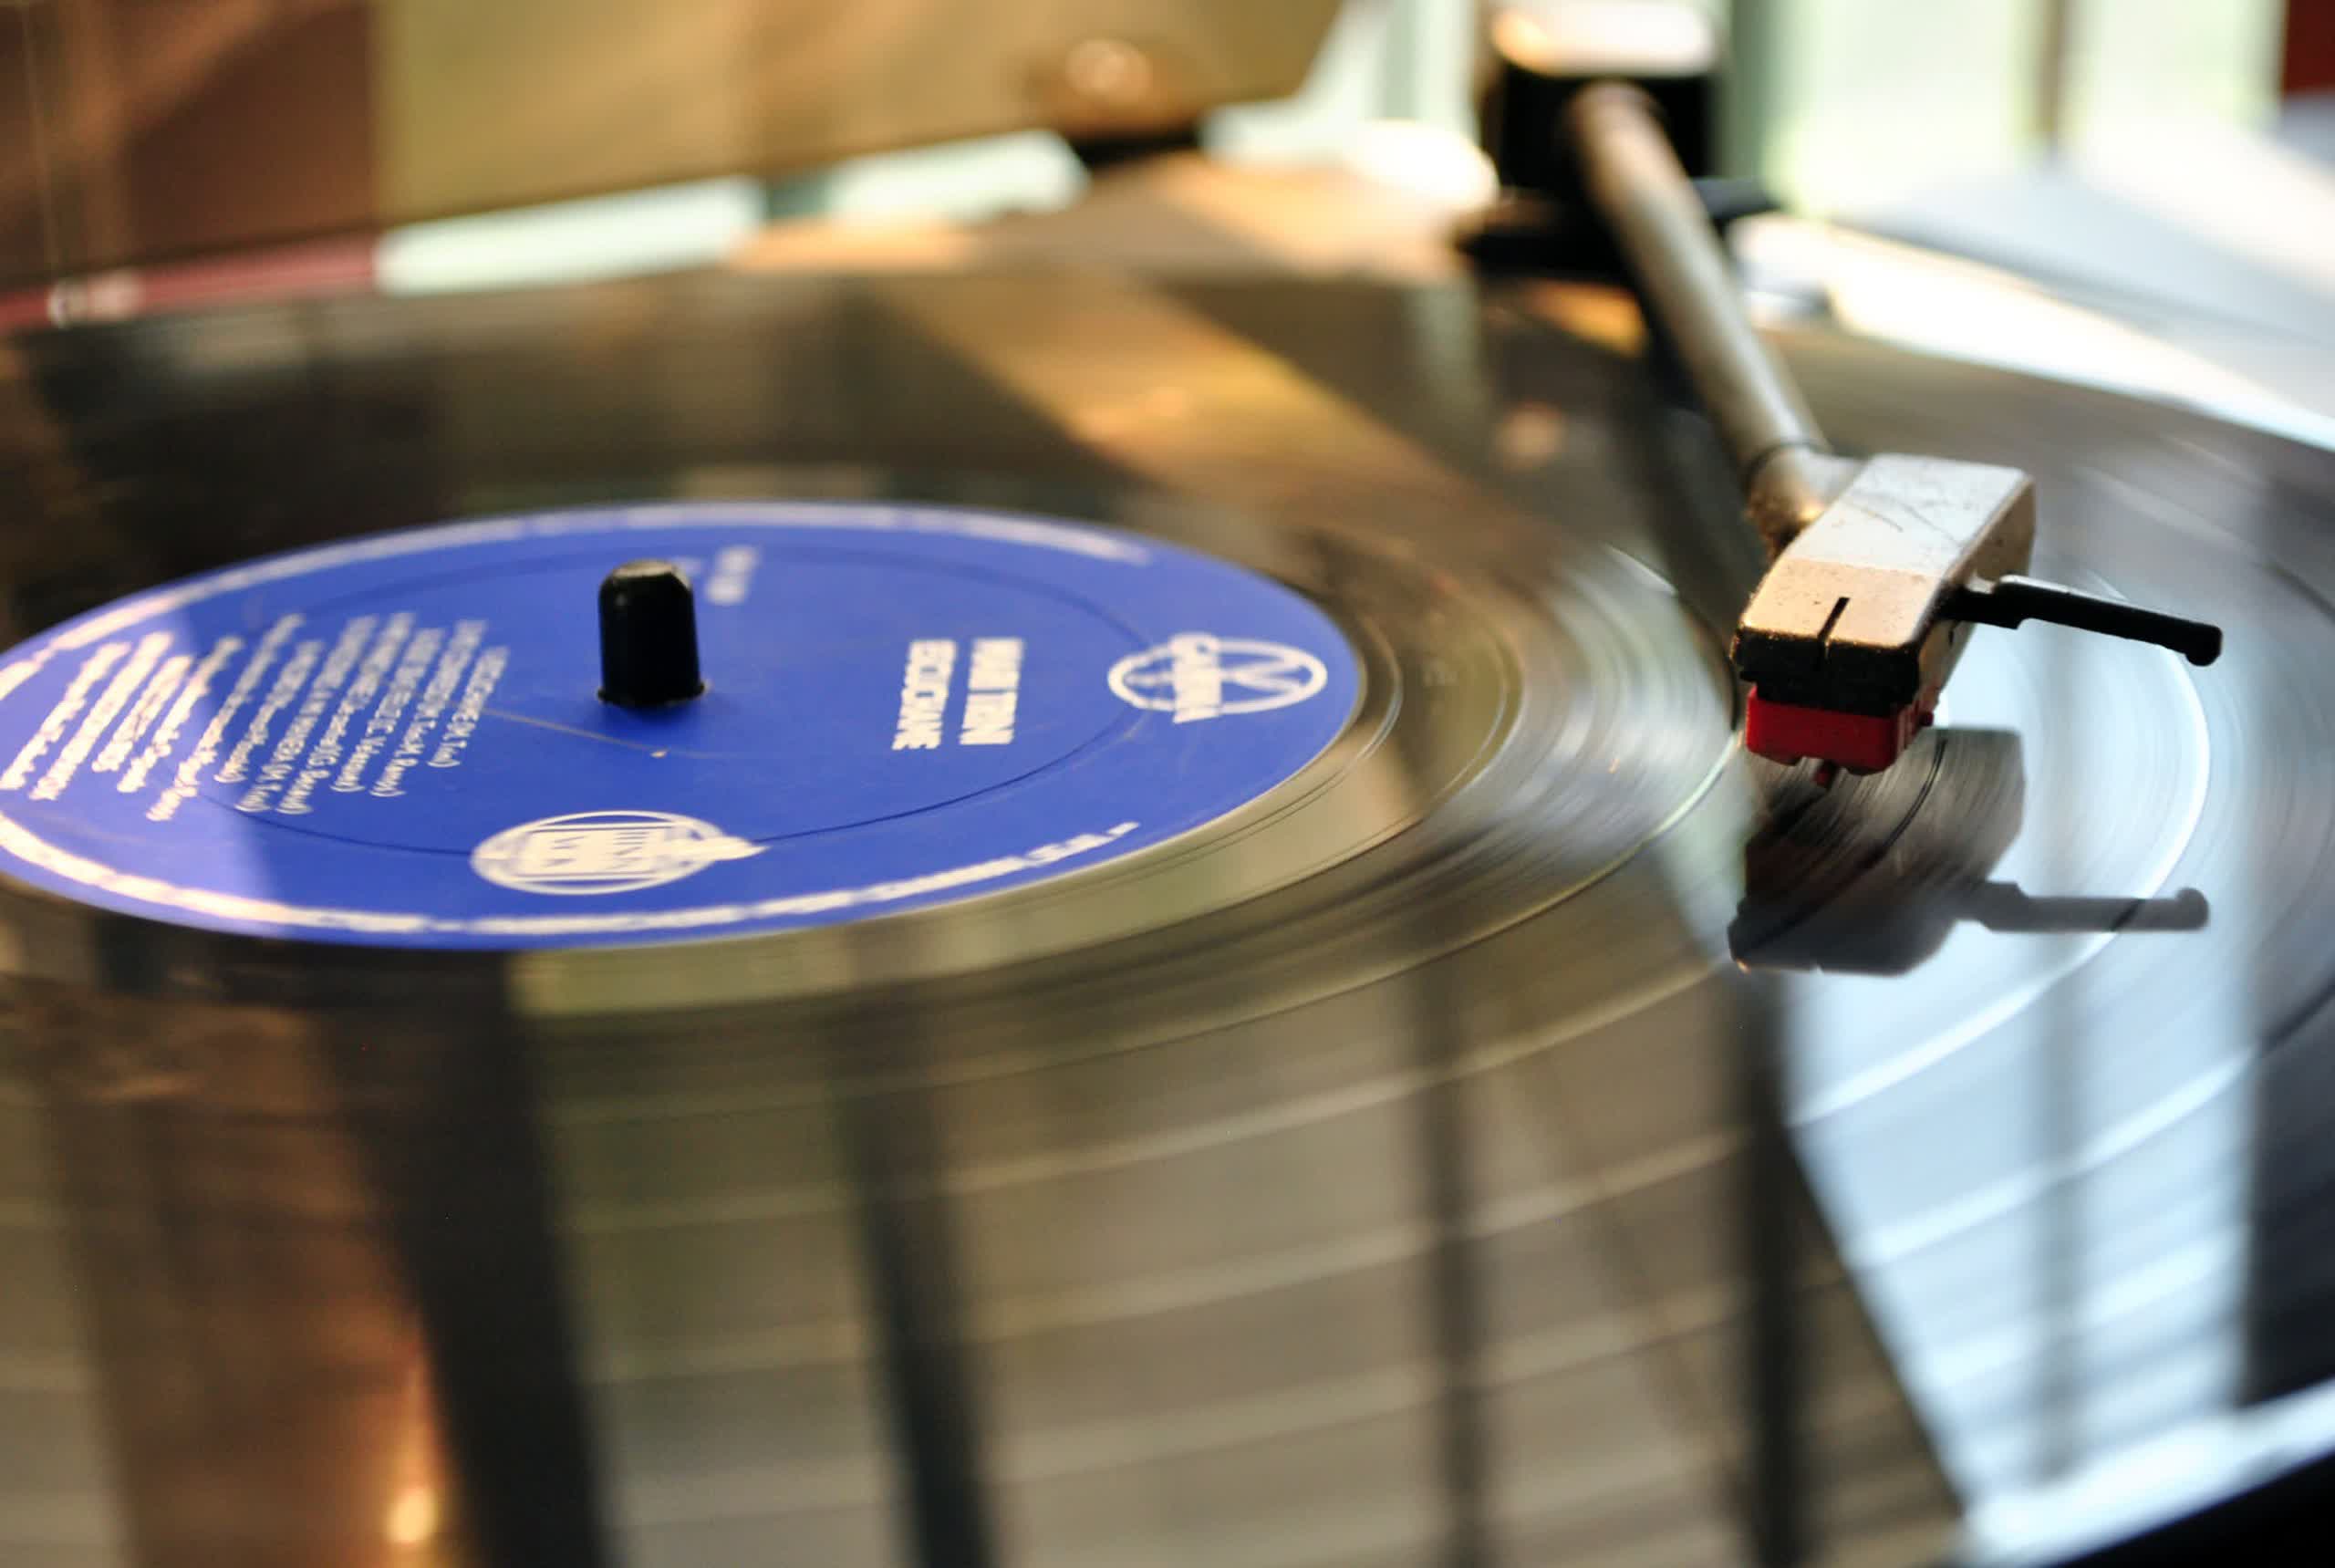 Vinyl outsells CDs for the first time in 35 years with 41 million records sold in 2022